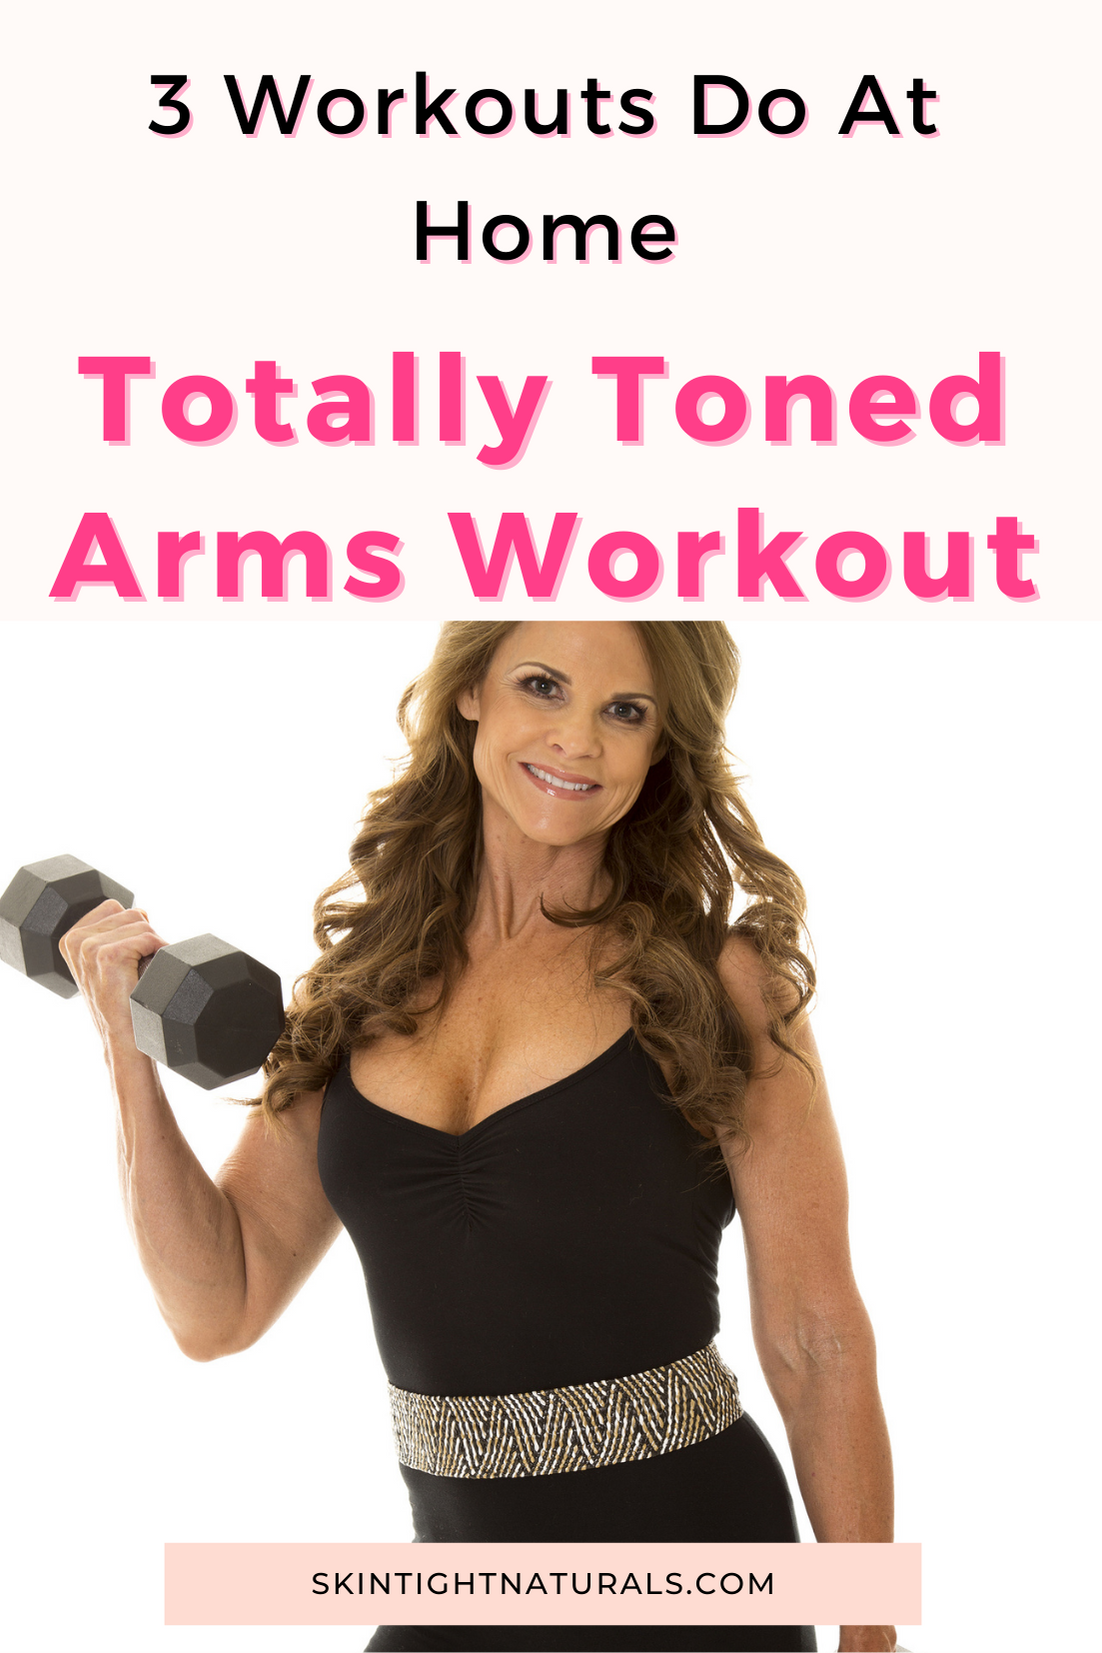 Totally Toned Arms Workout